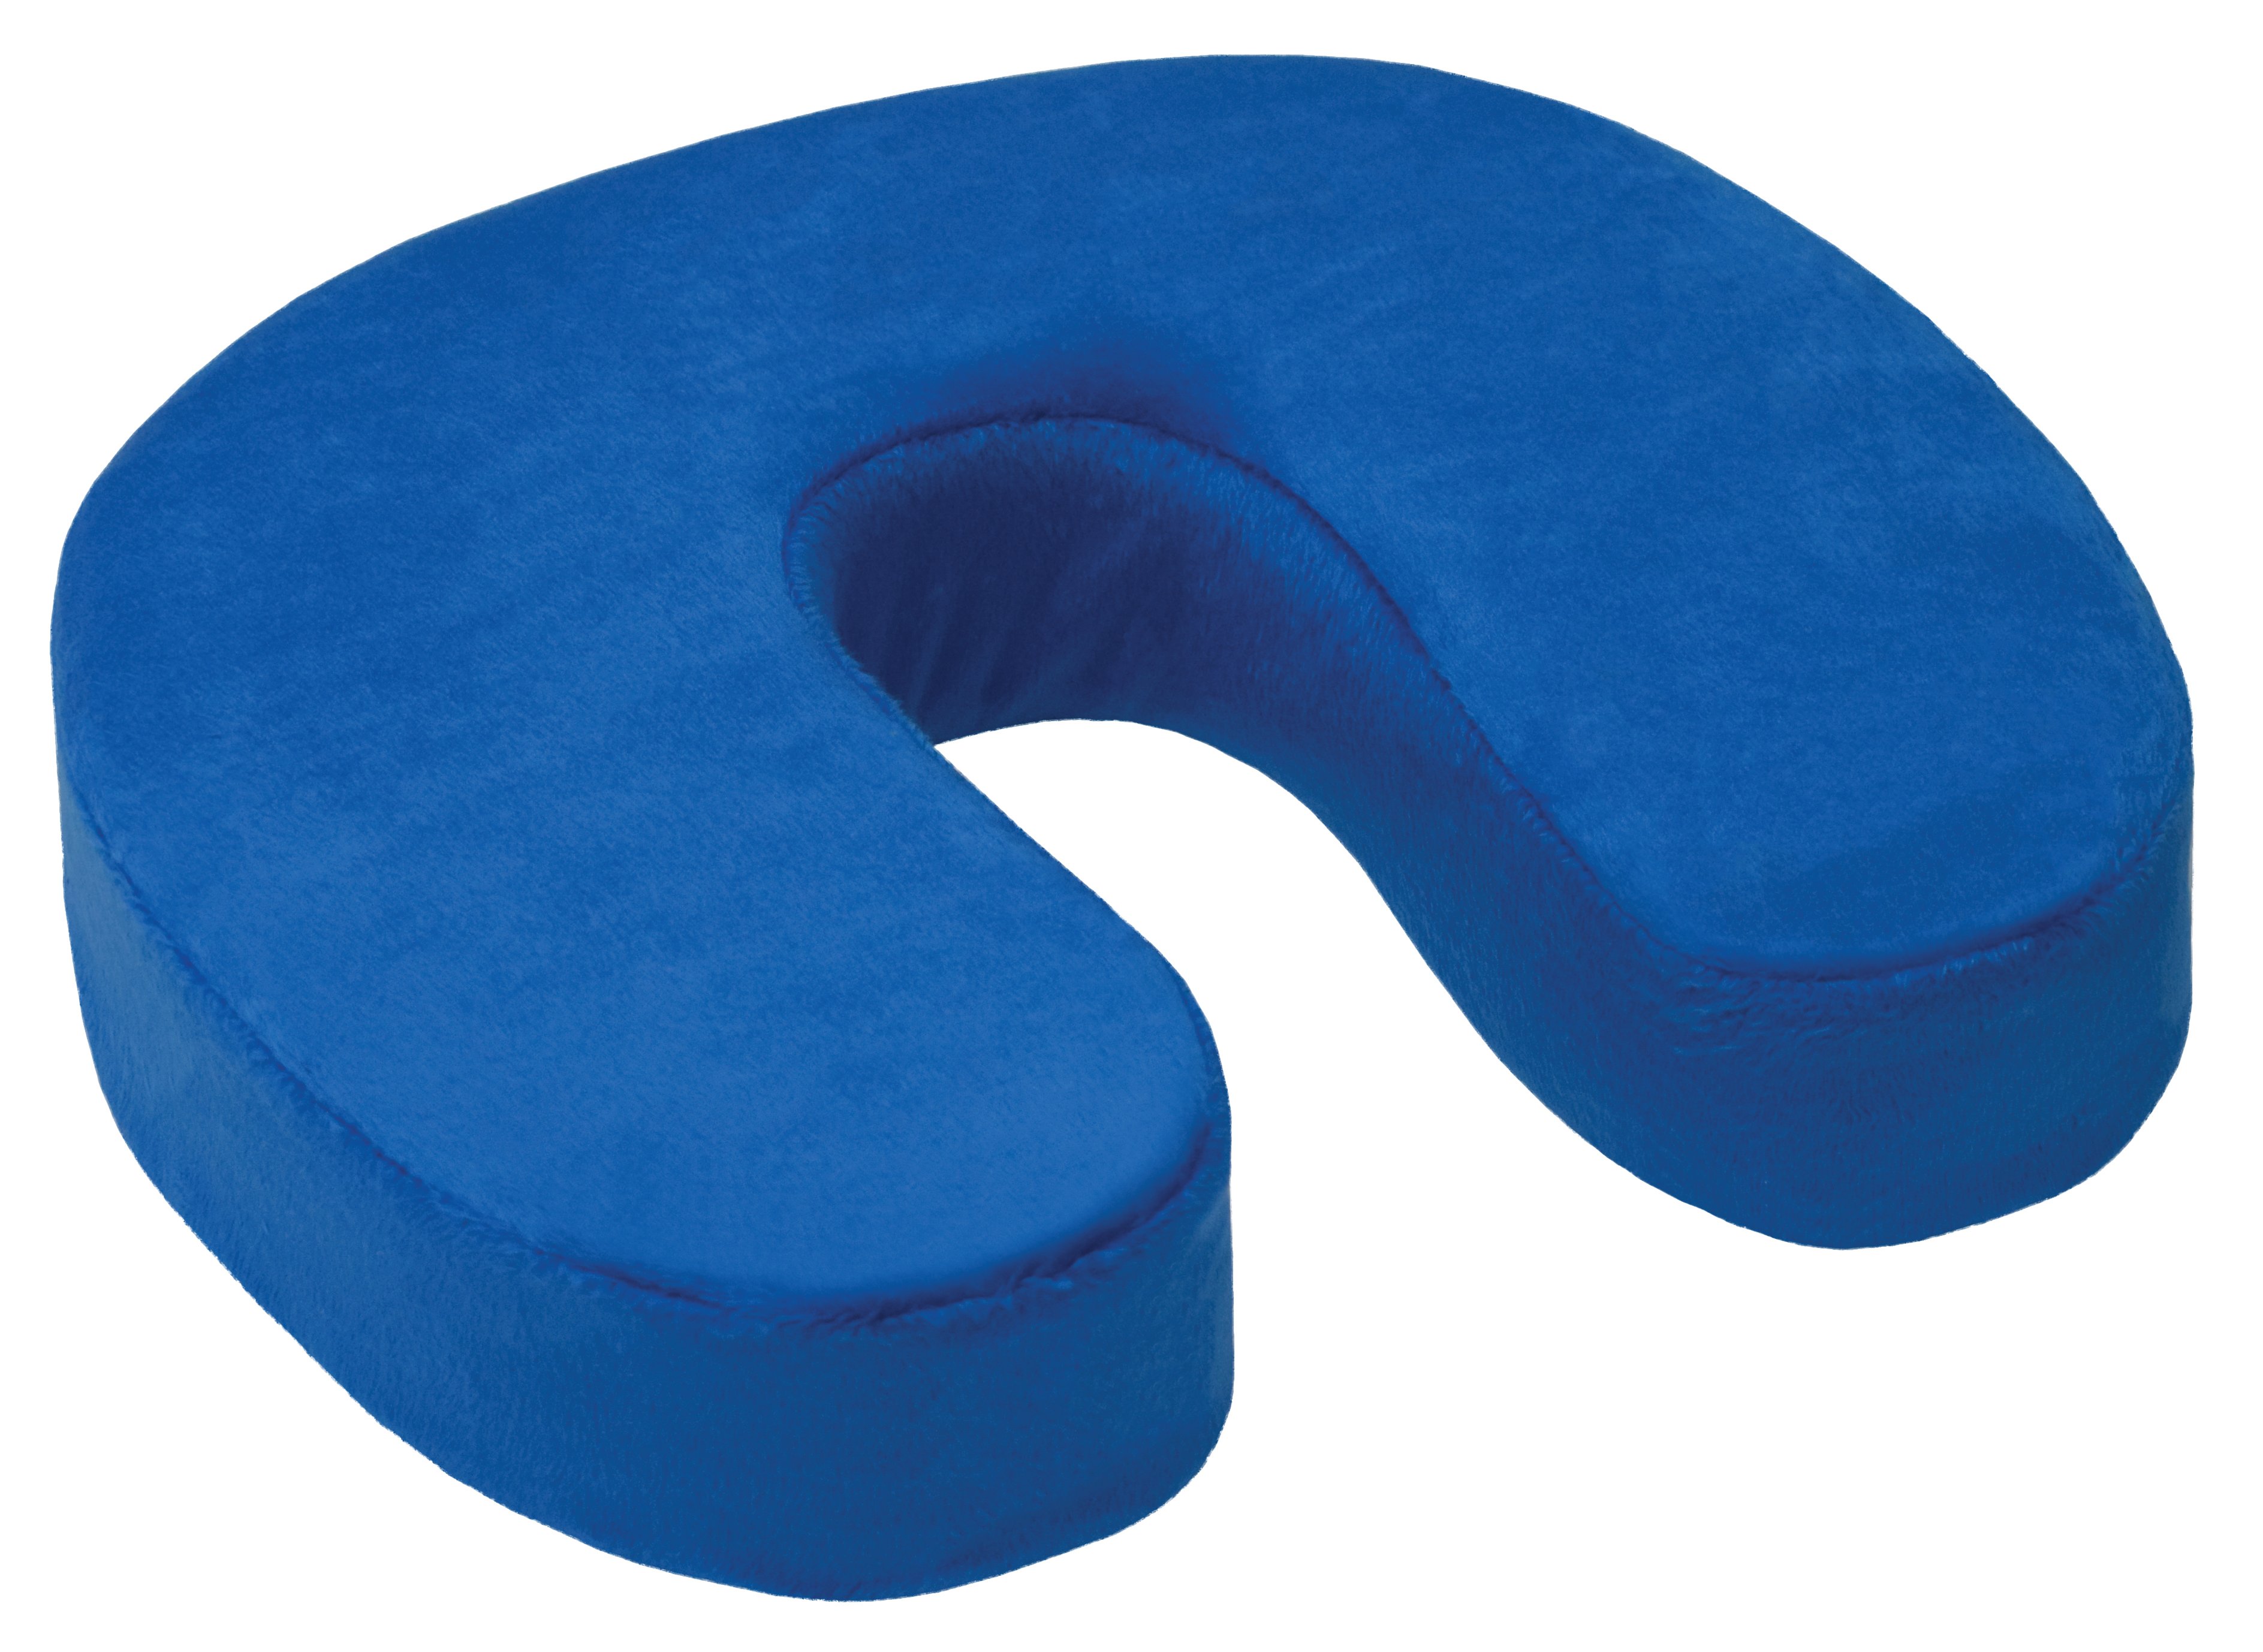 Travel Neck Pillow -0233- One Size Anatomic Help